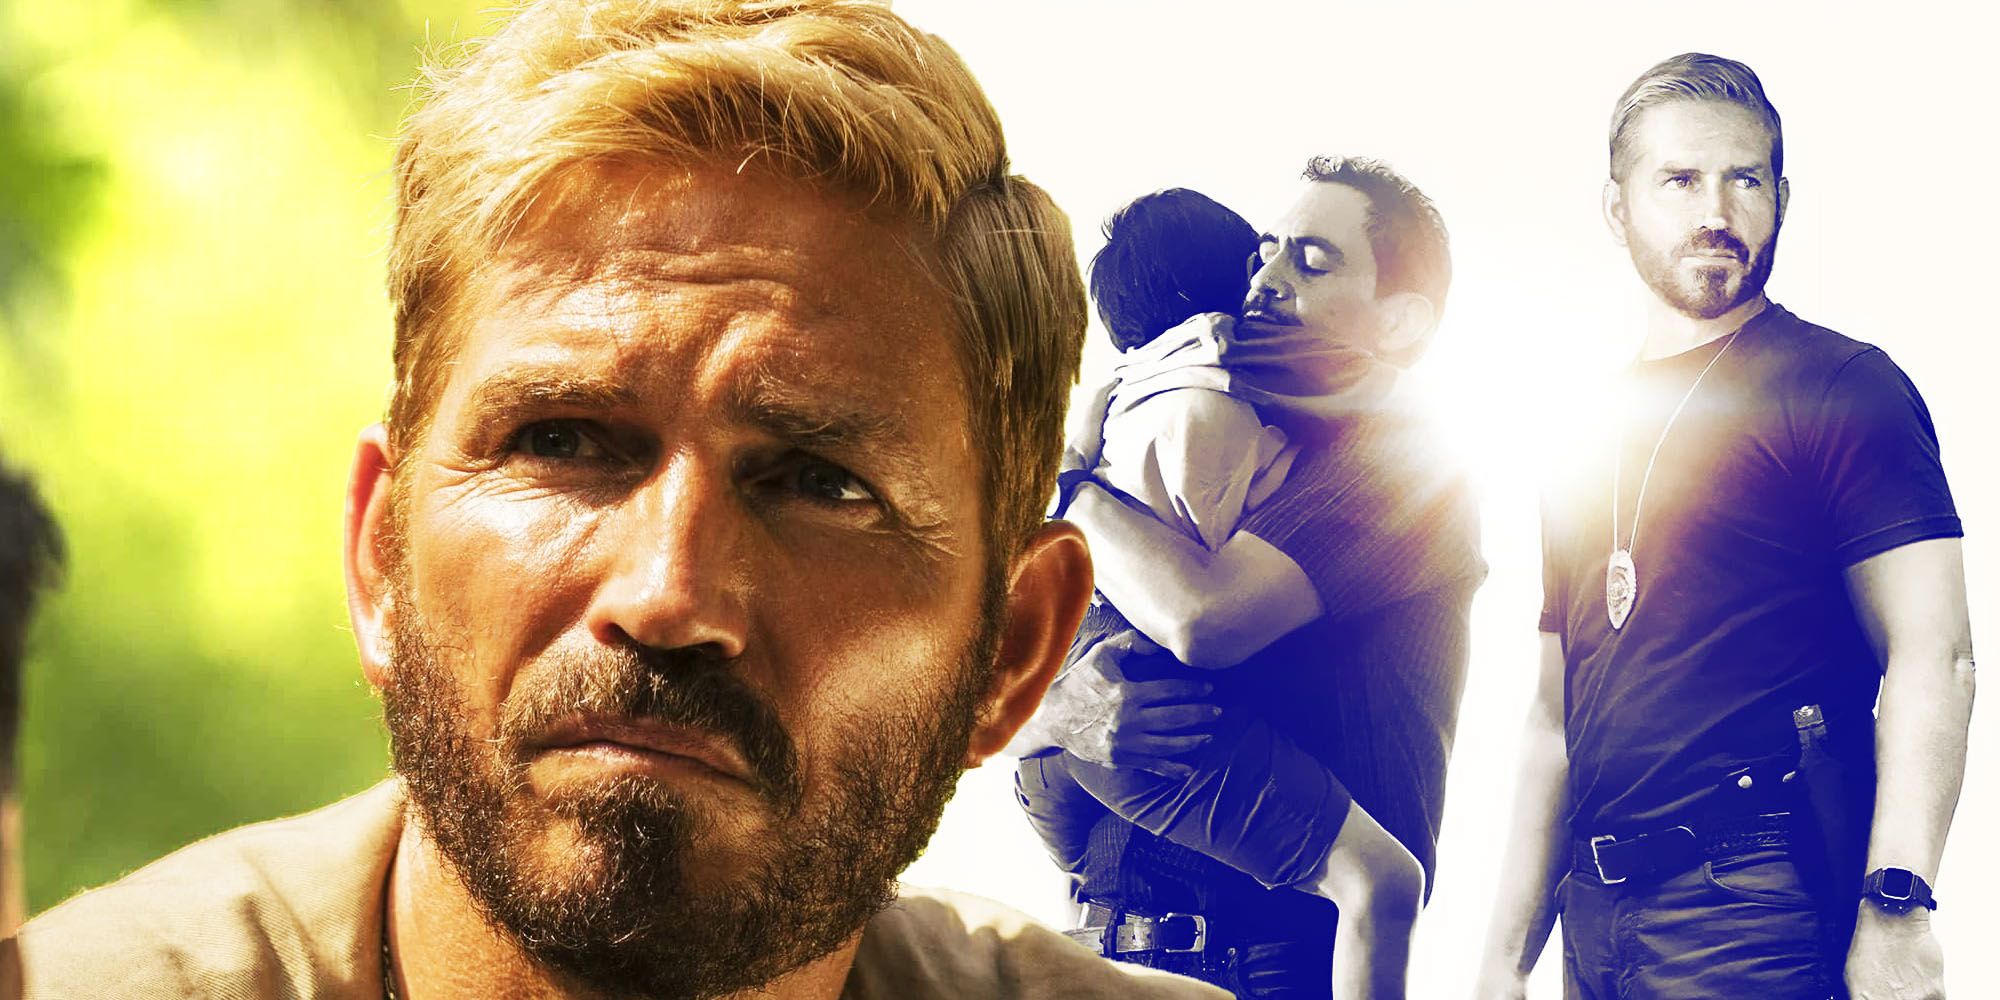 Custom image of Jim Caviezel as Tim Ballard and the poster for Sound of Freedom.